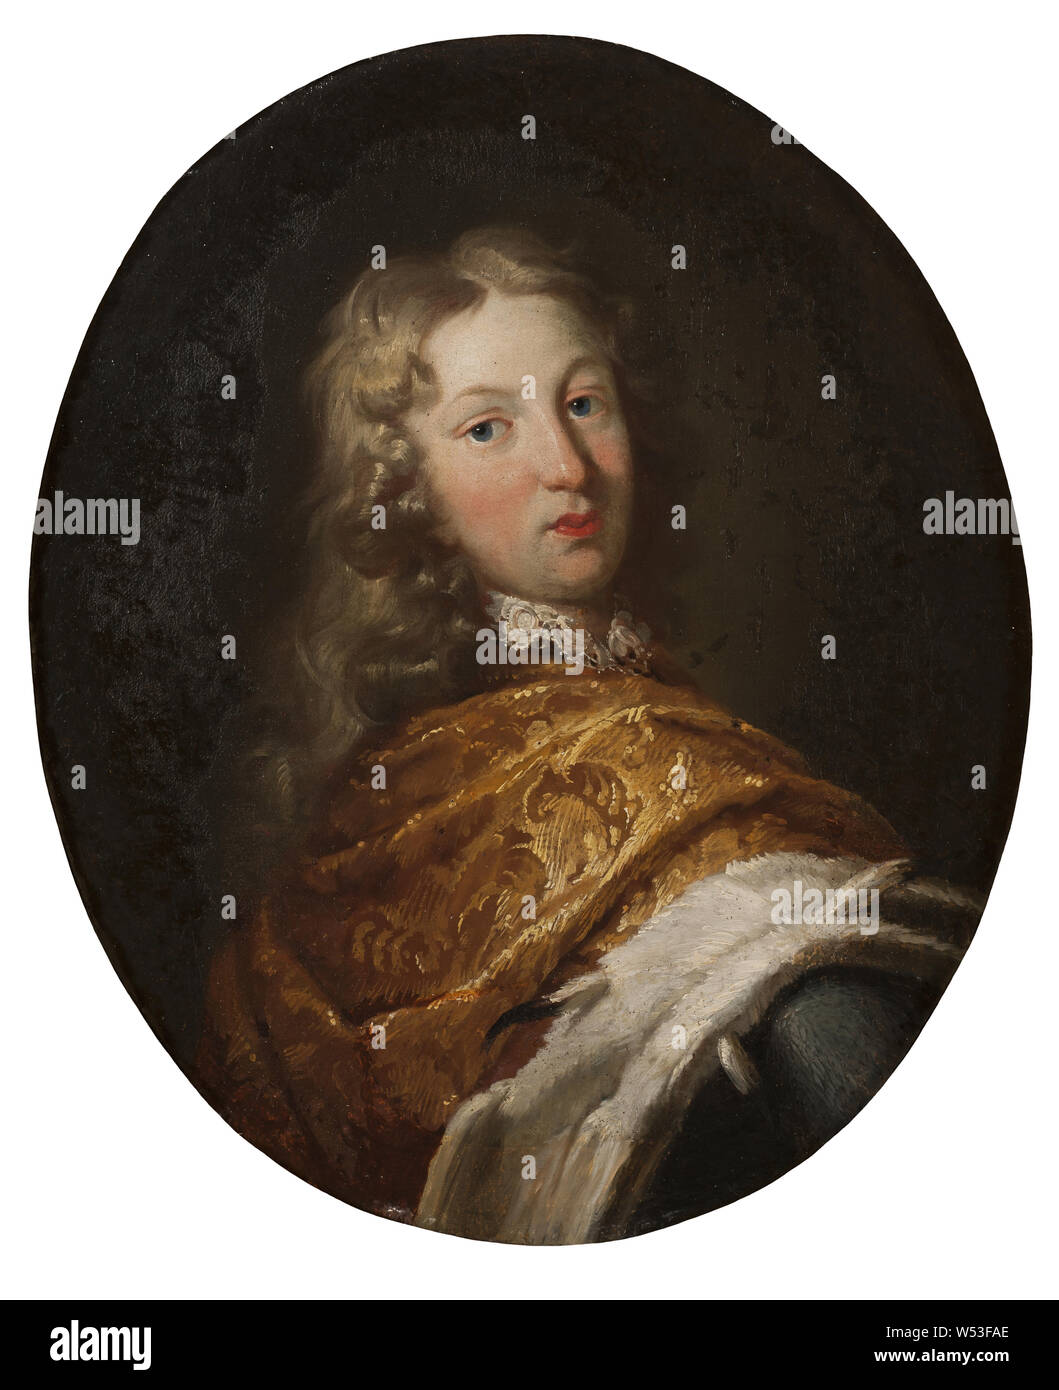 Karl III Vilhelm, Charles III Wilhelm (1679-1738) Margrave of Baden-Durlach, Karl III Vilhelm (1679-1738), mark greve of Baden-Durlach, painting, 1696, Oil on canvas, Height, 39 cm (15.3 inches), Width, 32 cm (12.5 inches) Stock Photo